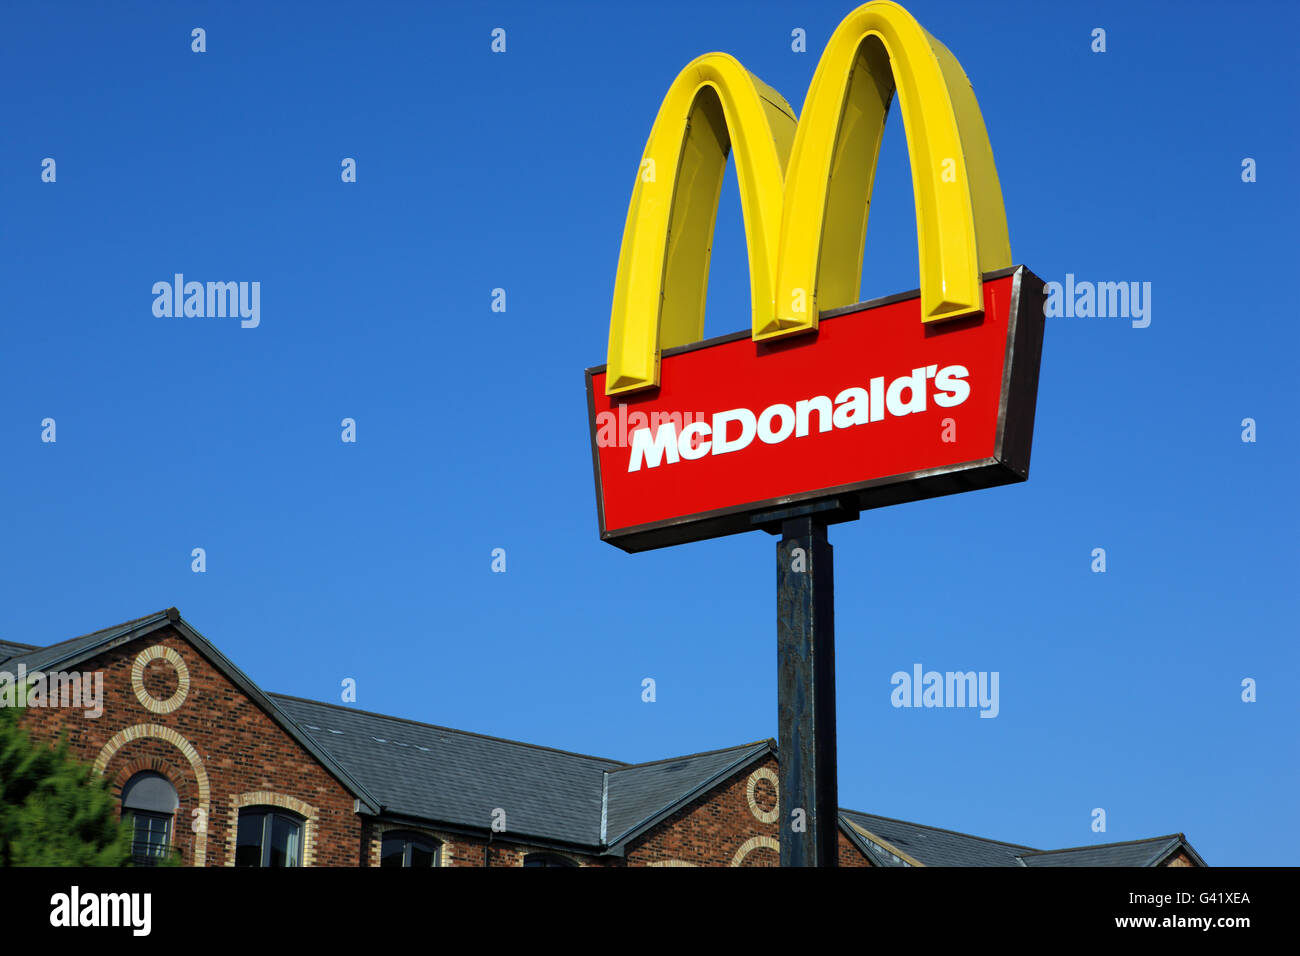 McDonald's sign outside the McDonald's fast food and drive thru restaurant in Greenock, Inverclyde, Scotland Stock Photo